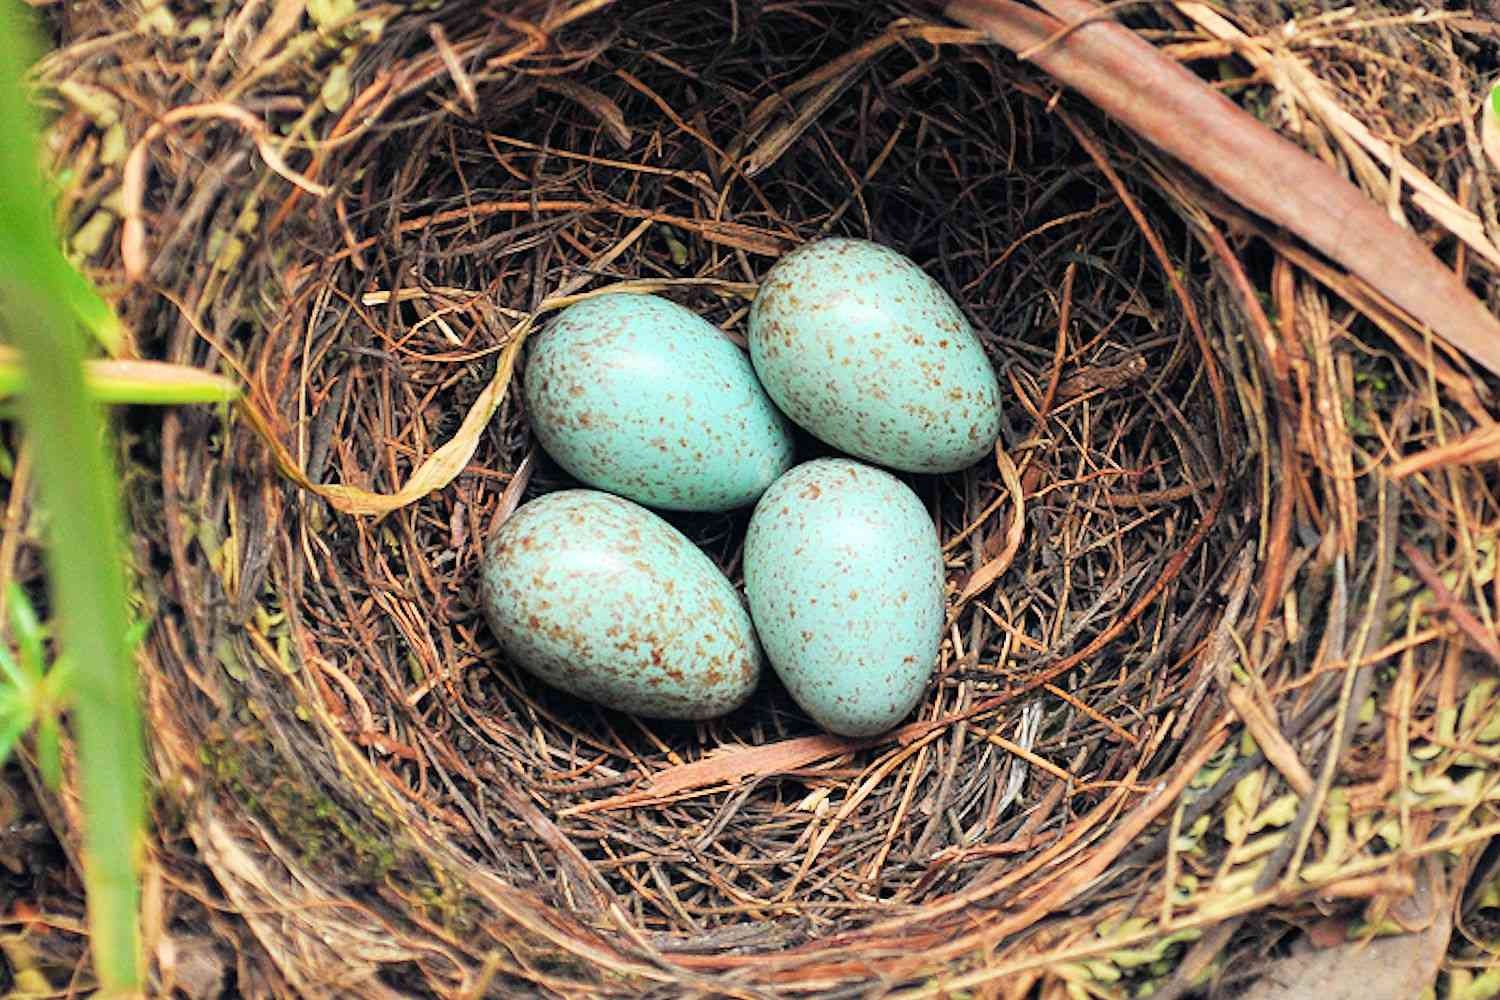 that in the United States, it is illegal to remove or destroy a nest that has eggs in it or young birds still dependent on it for survival. It is also illegal for anyone to keep a nest they take out of a tree or find on the ground unless they have a permit.